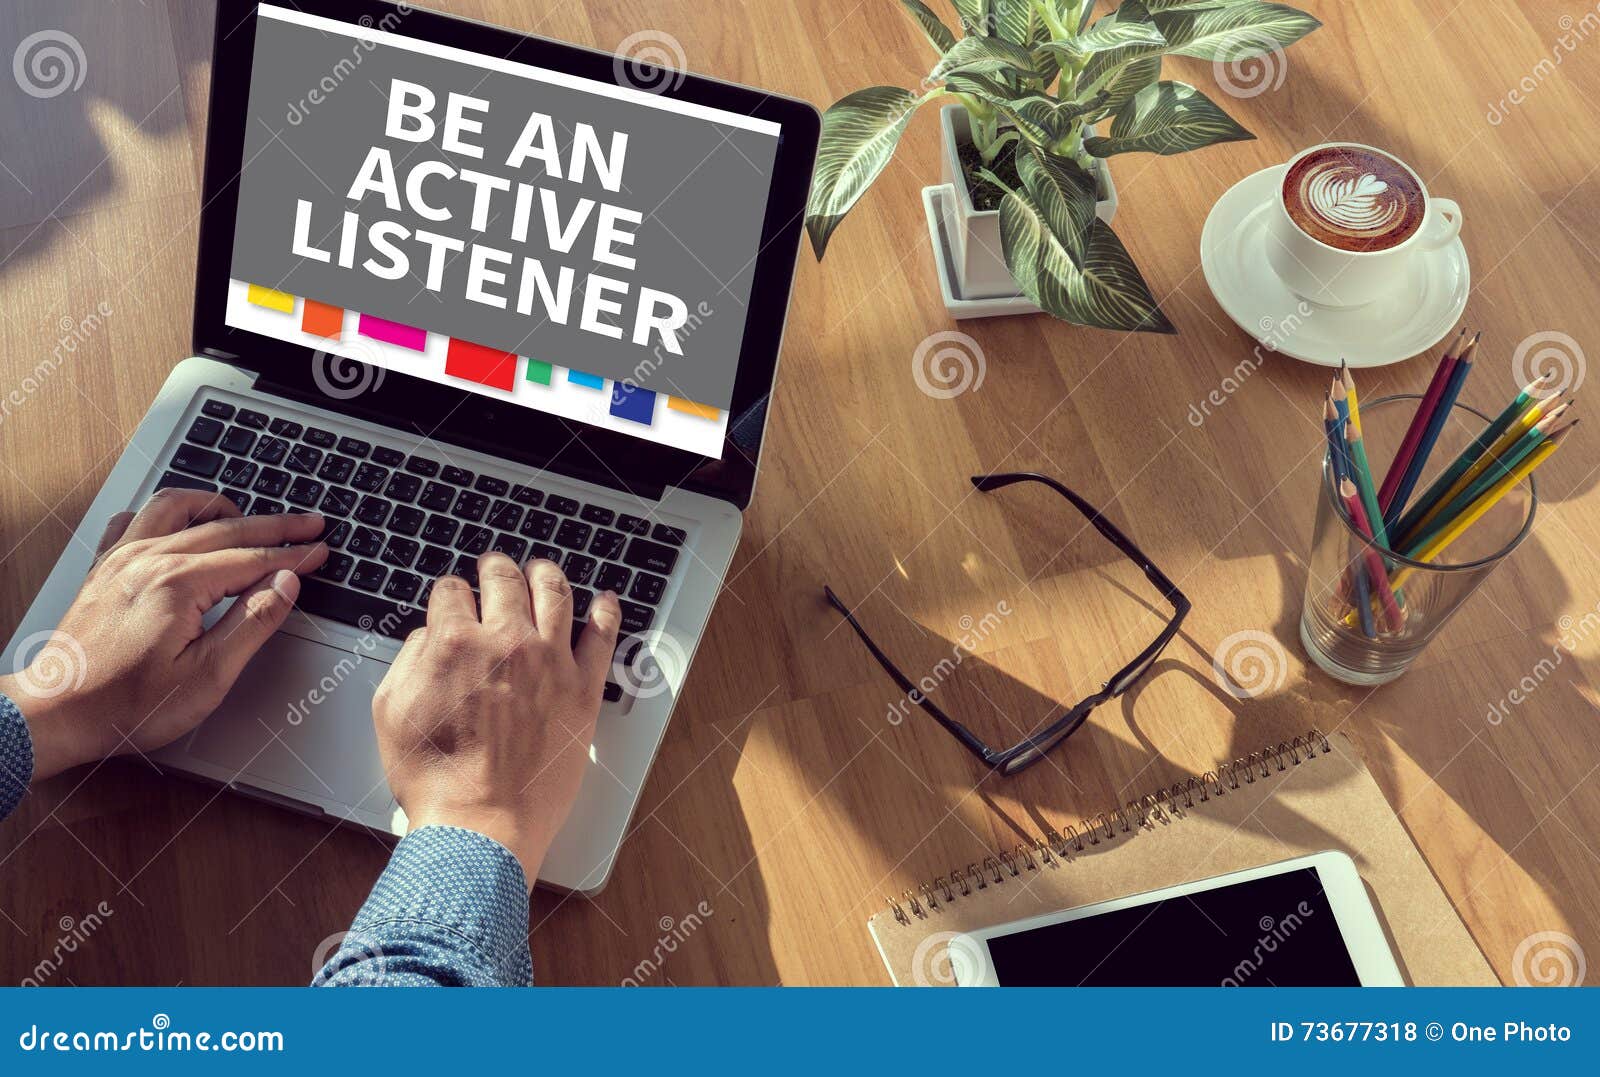 be an active listener